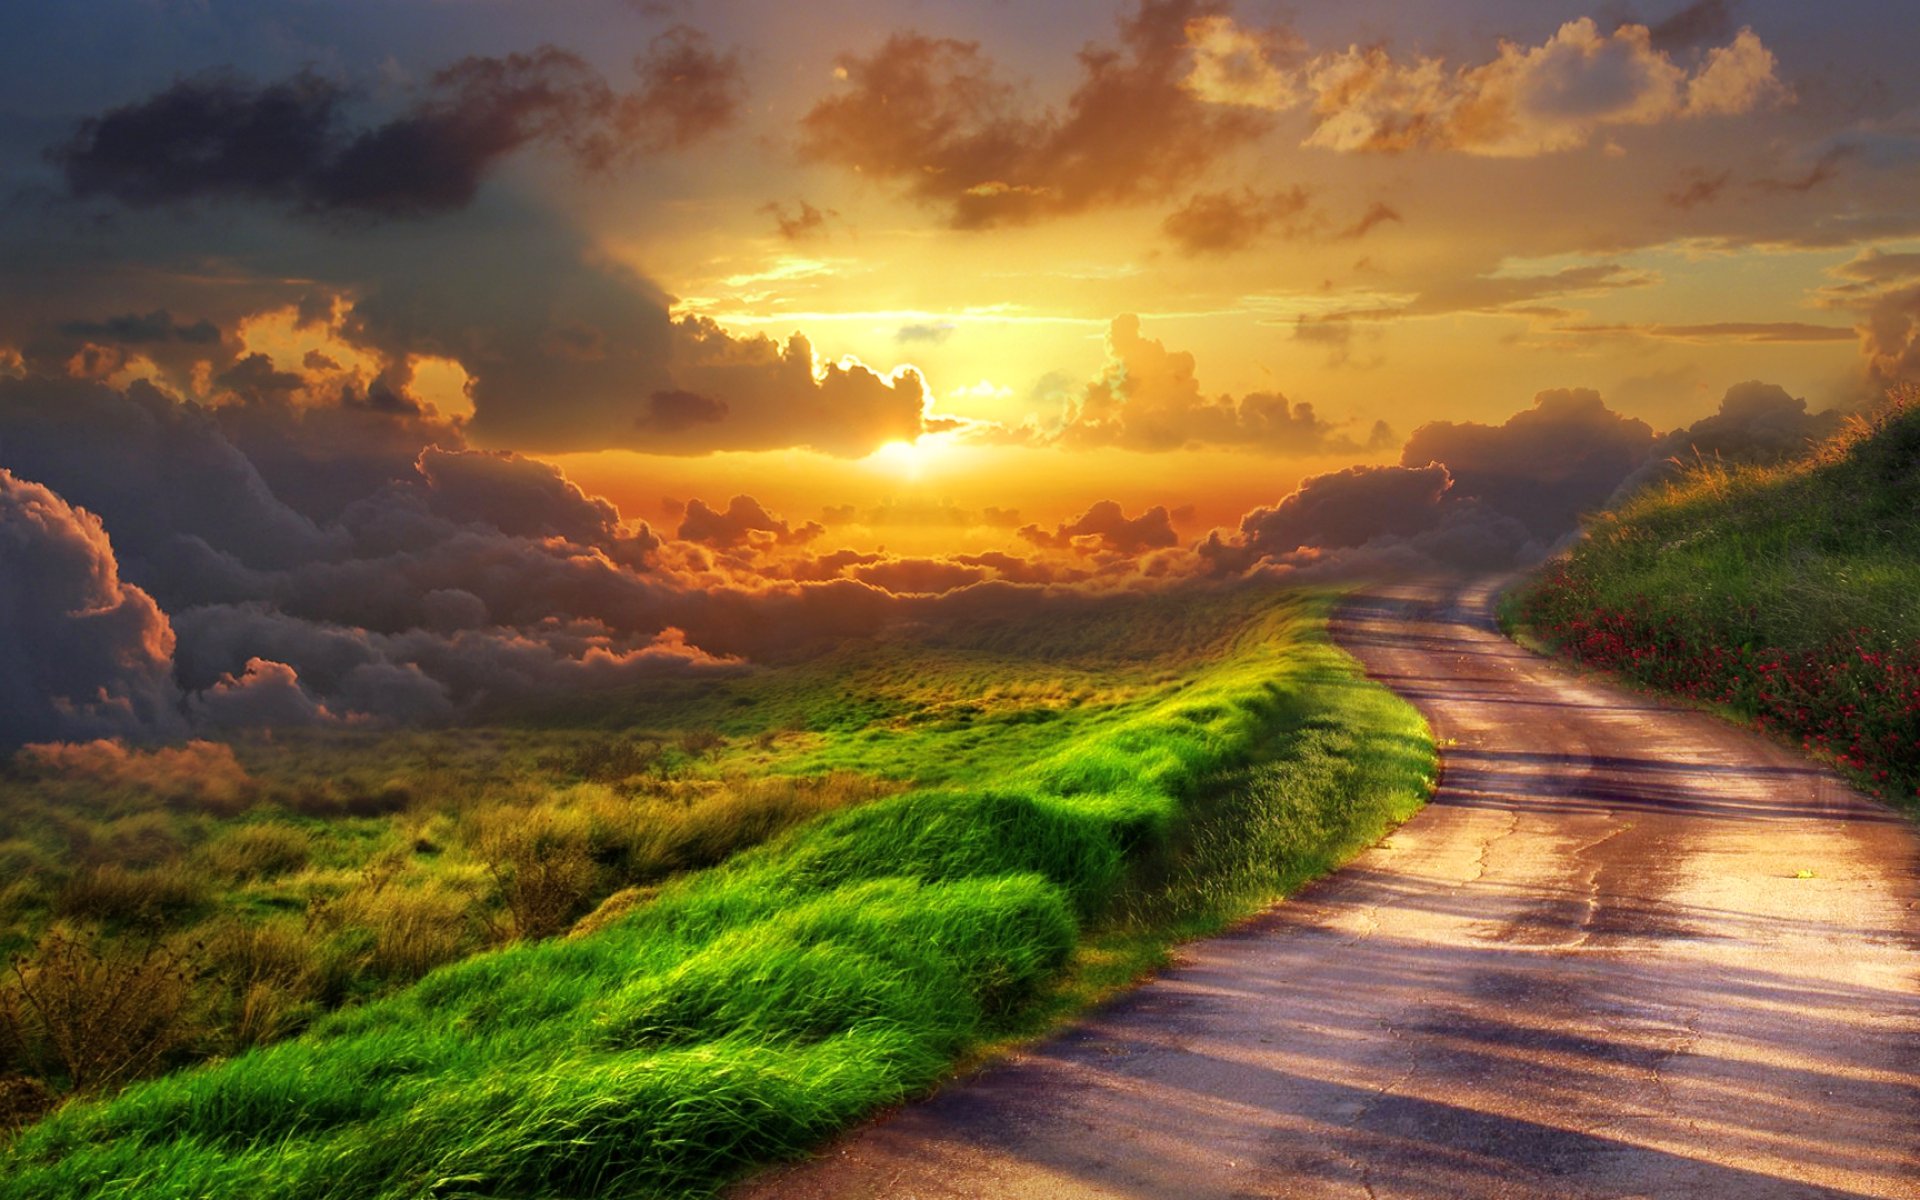 Stairway To Heaven HD Wallpapers - HD Wallpapers Backgrounds of ...